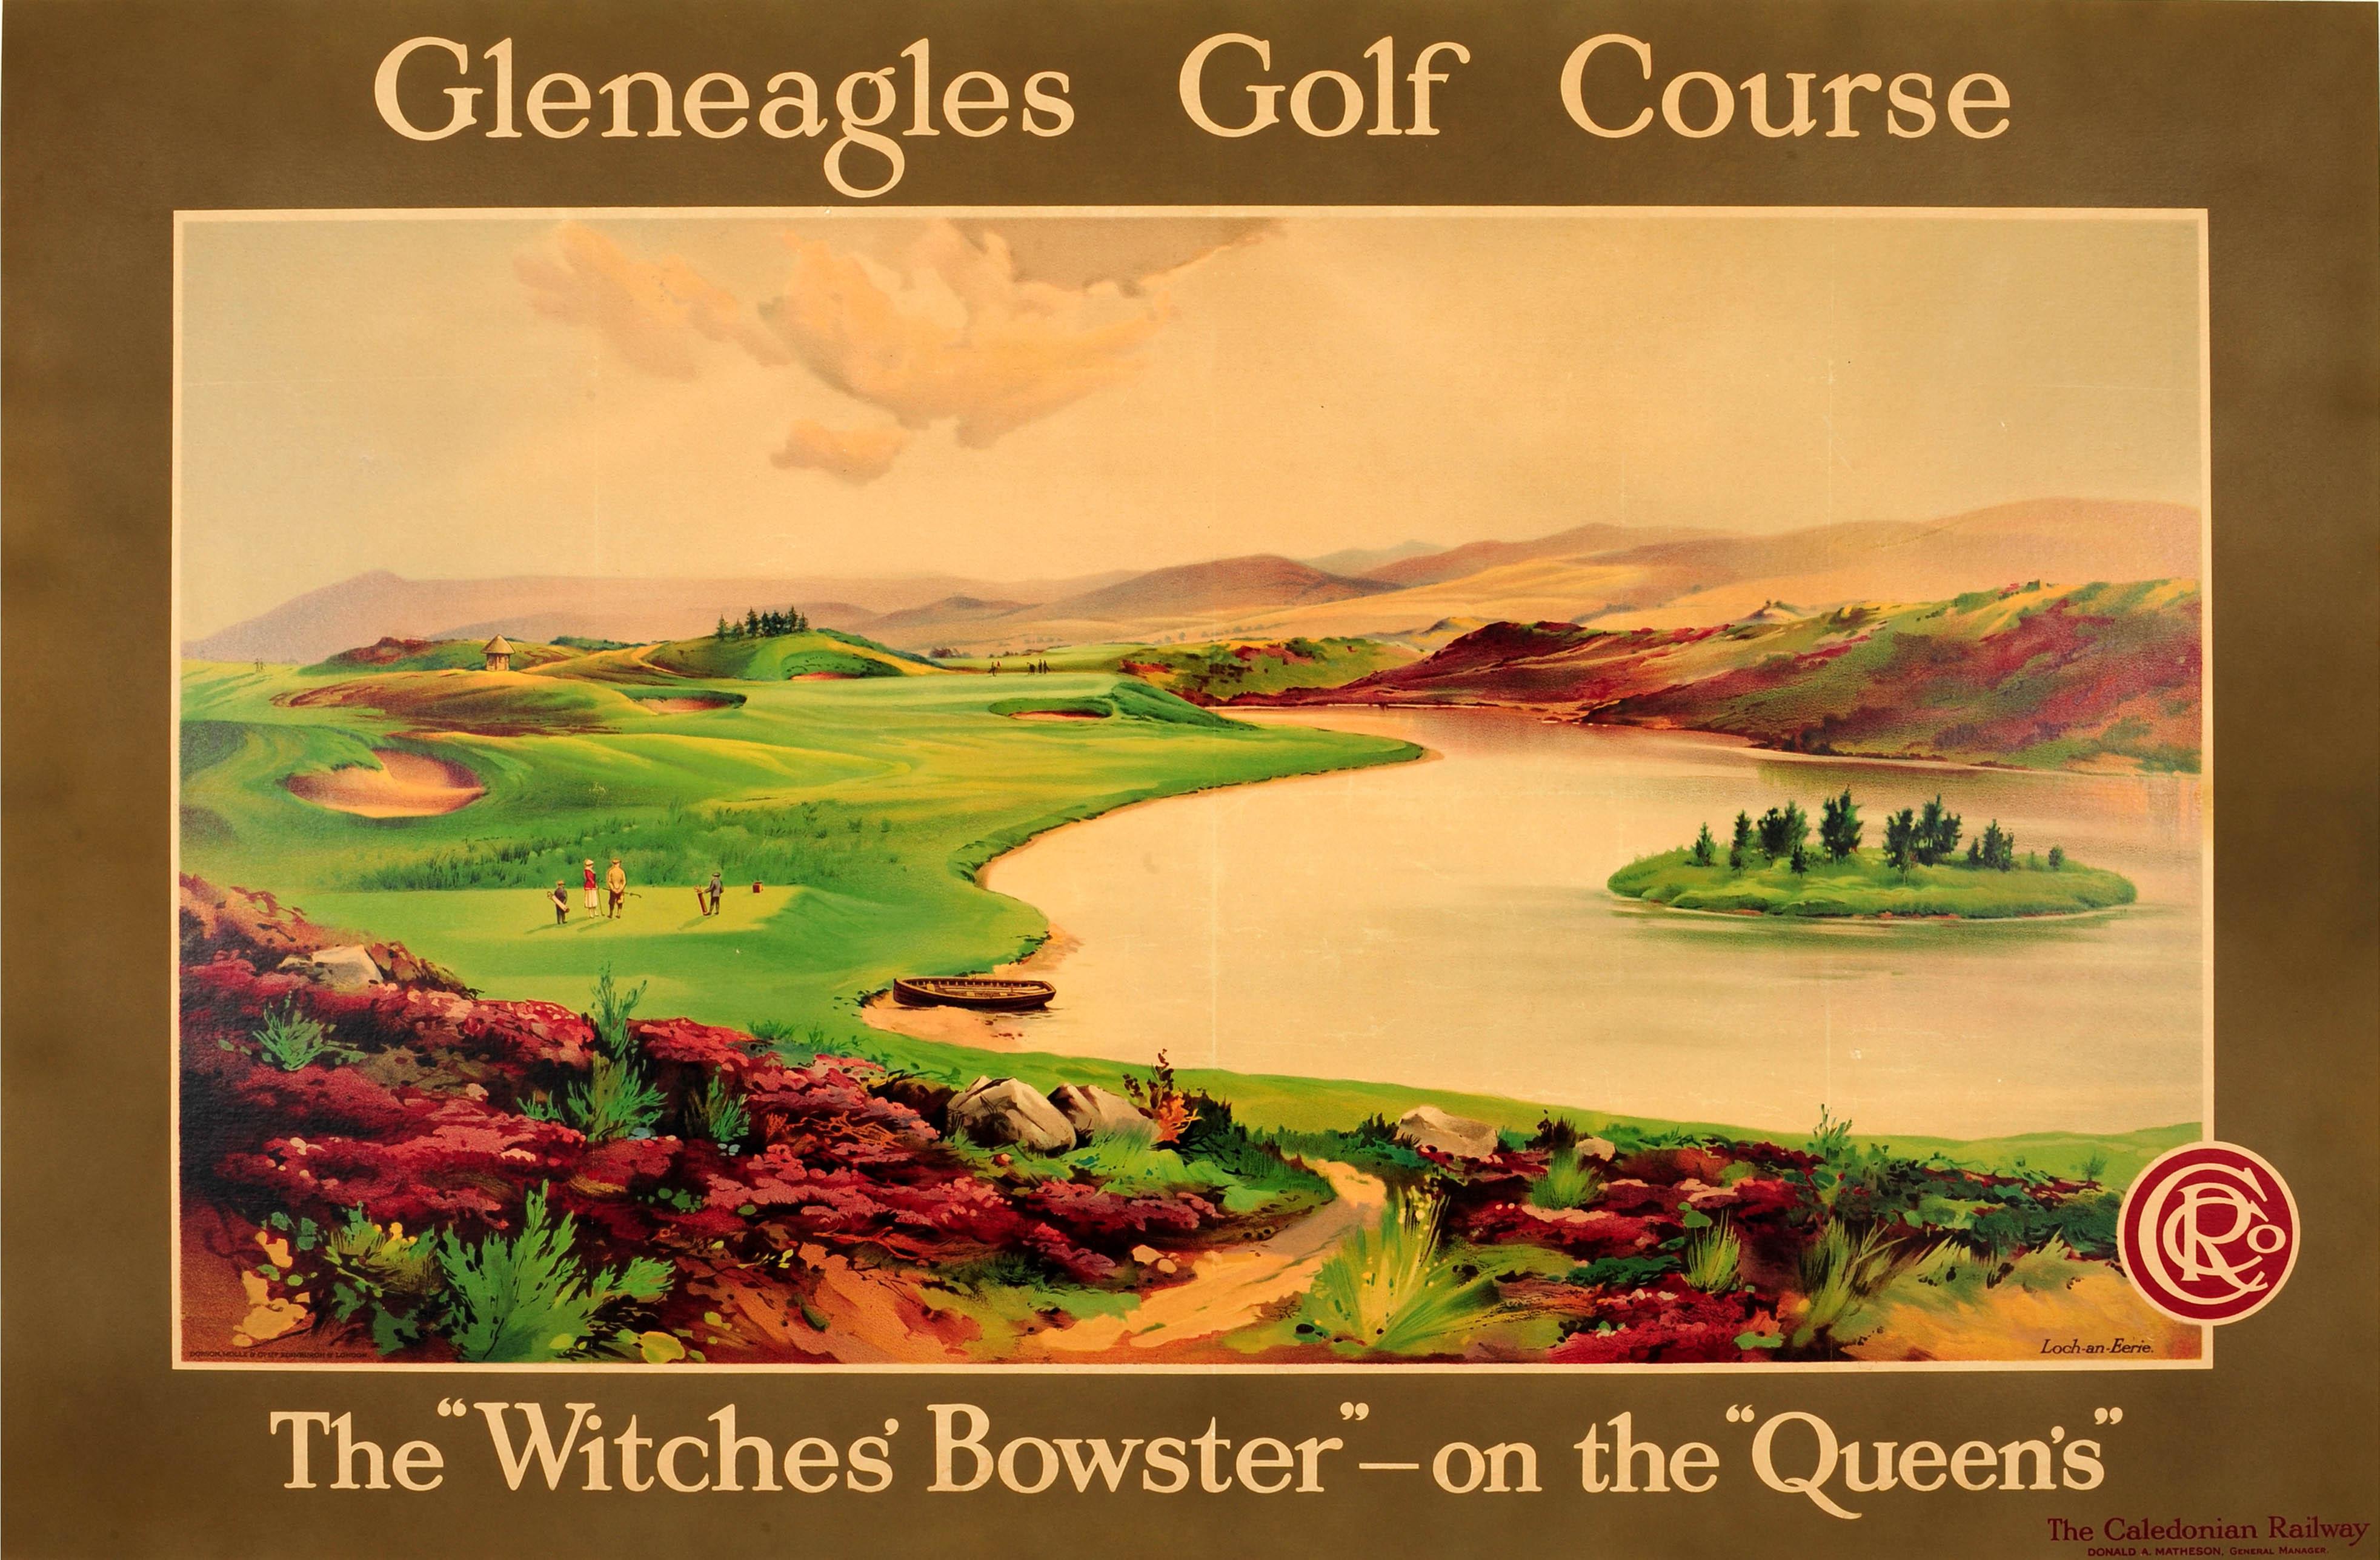 Unknown Print – Large Original Caledonian Railway Poster Gleneagles Golf Course Witches' Bowster